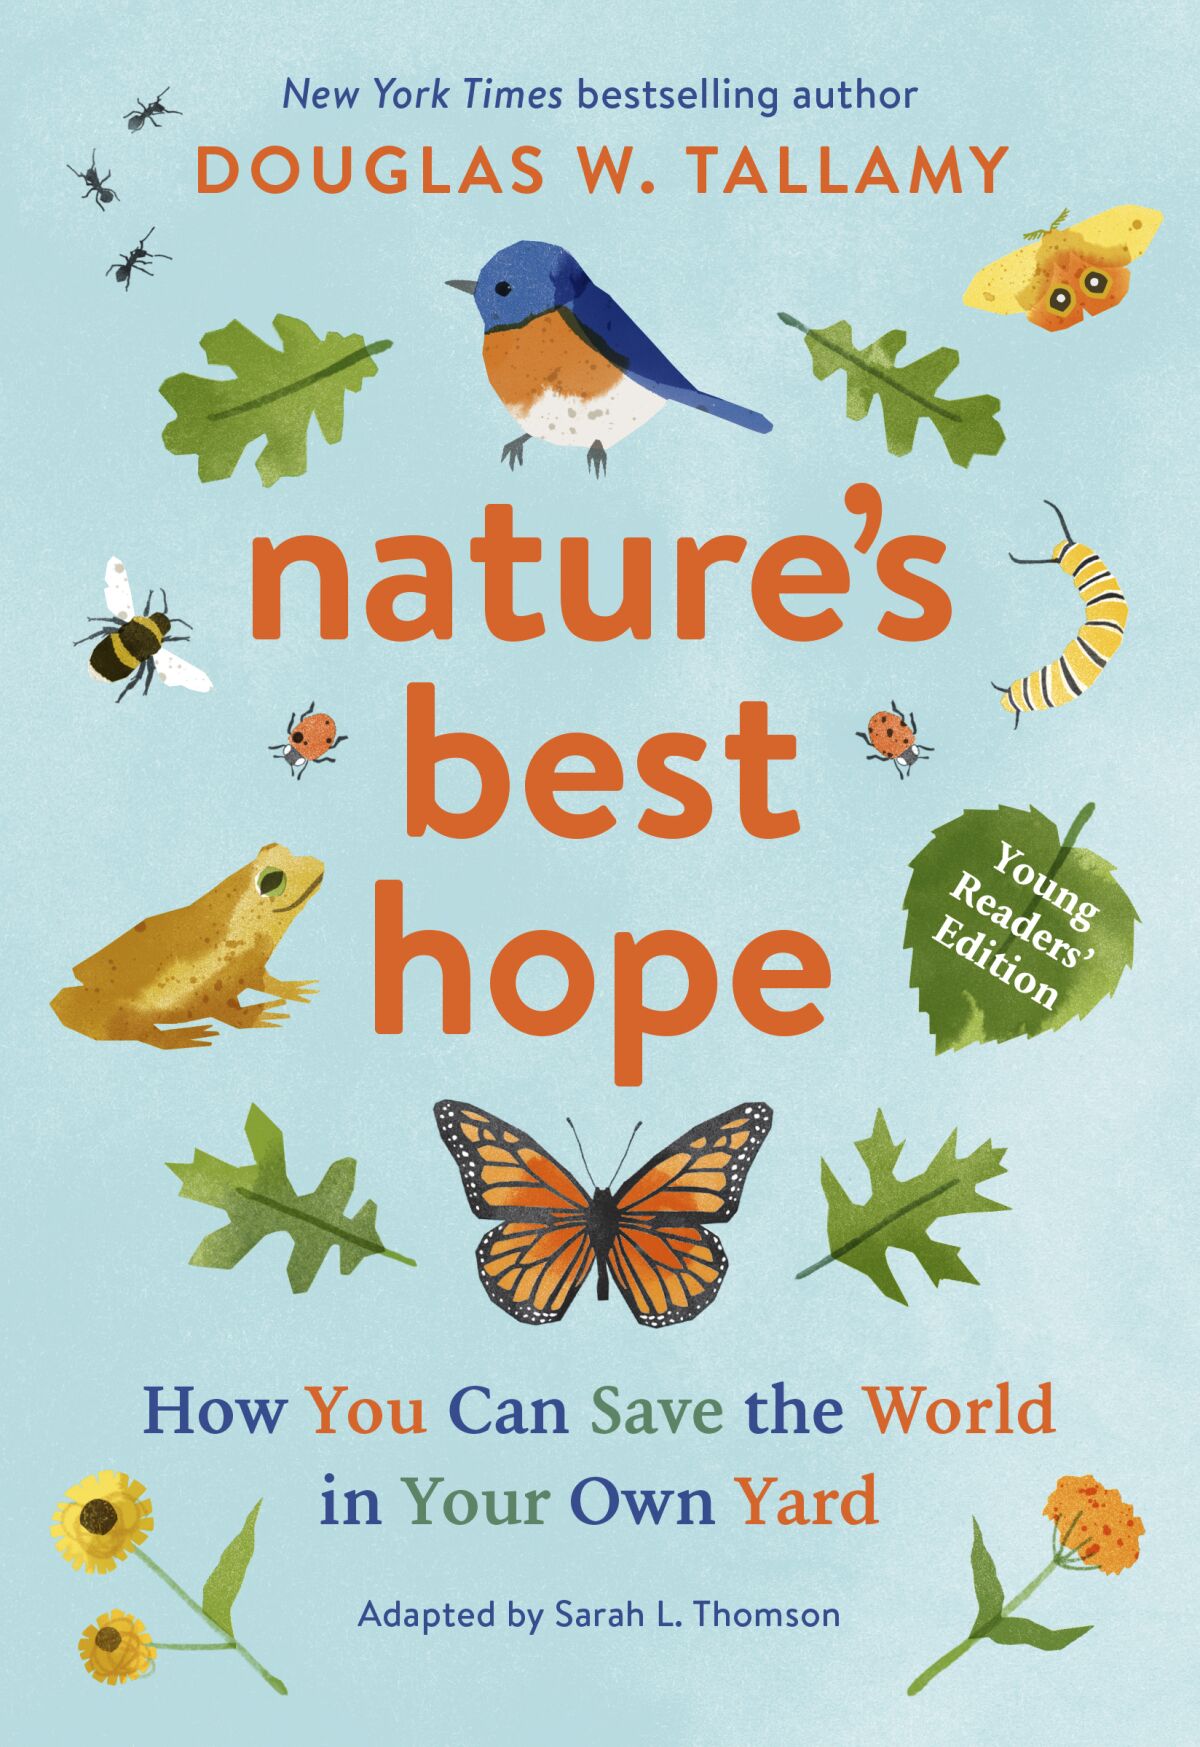 A book cover for "Nature's Best Hope: How You Can Save the World in Your Own Yard" by Douglas W. Tallamy.